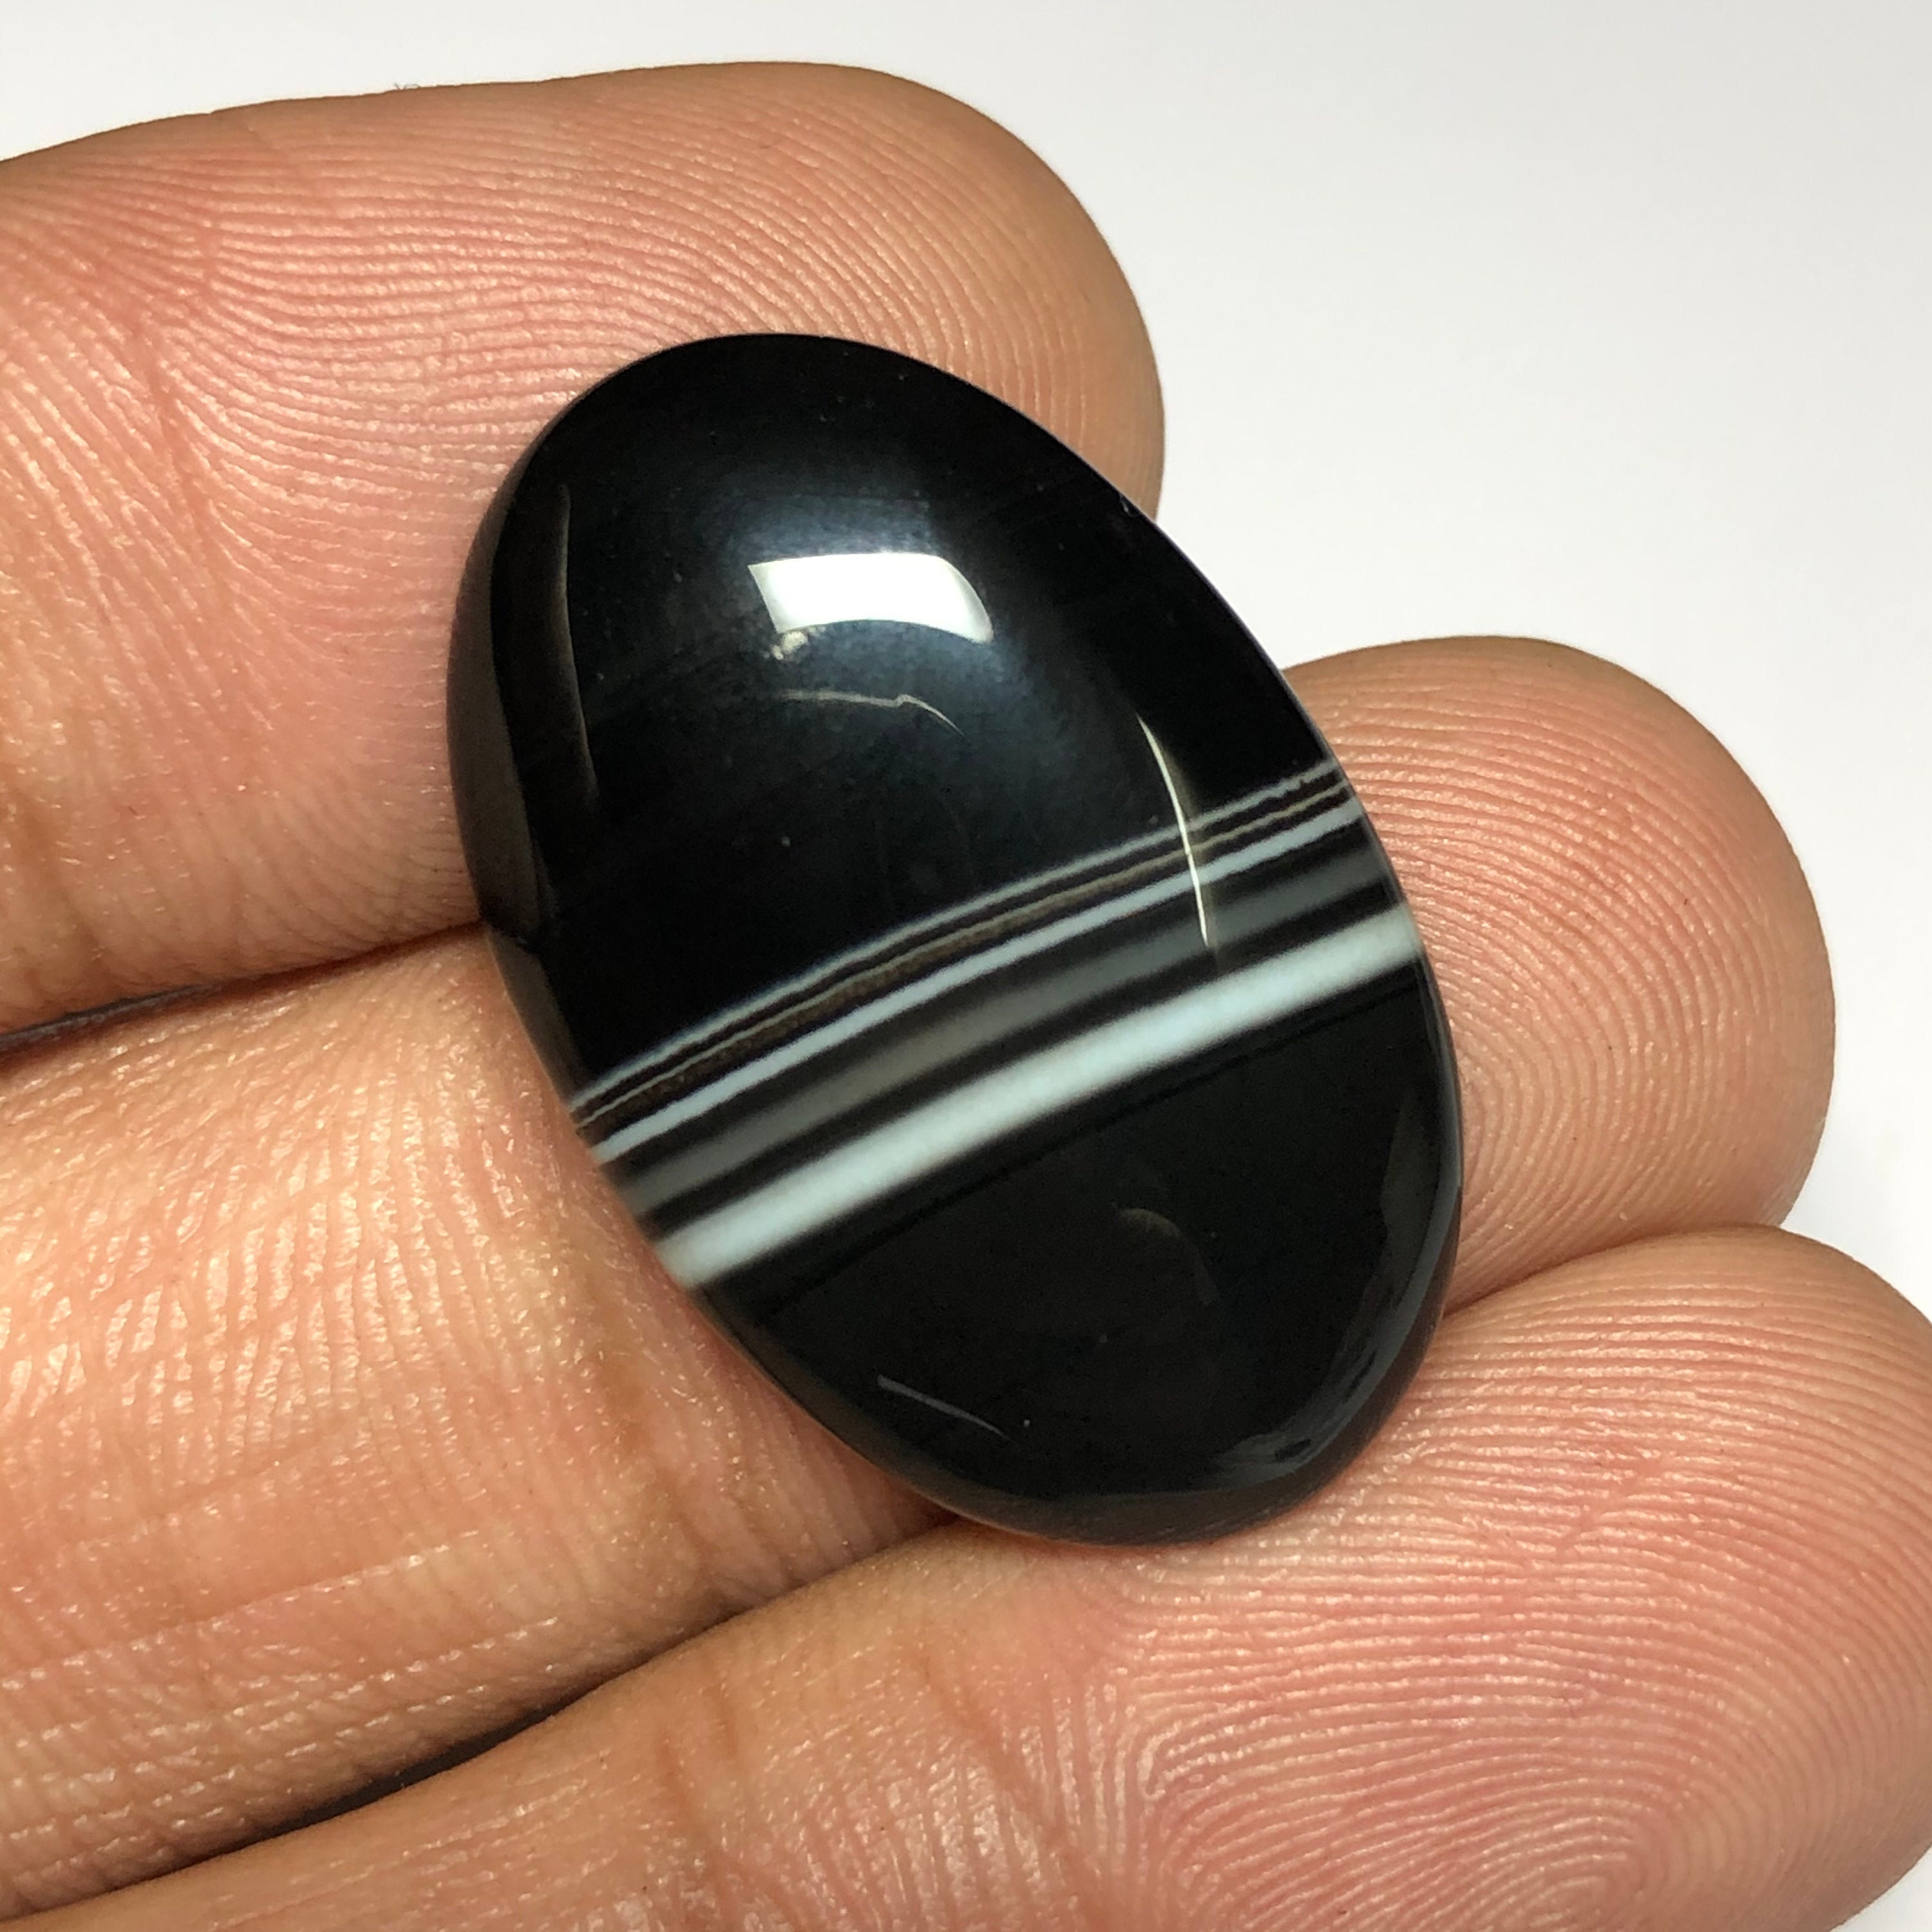 21.6 Cts Amazing Quality Natural Black Banded Agate Cabochon Gemstone Size 28x18x5 mm Oval Shape Black Agate Cabochon Jewelry Stone GM122-A2